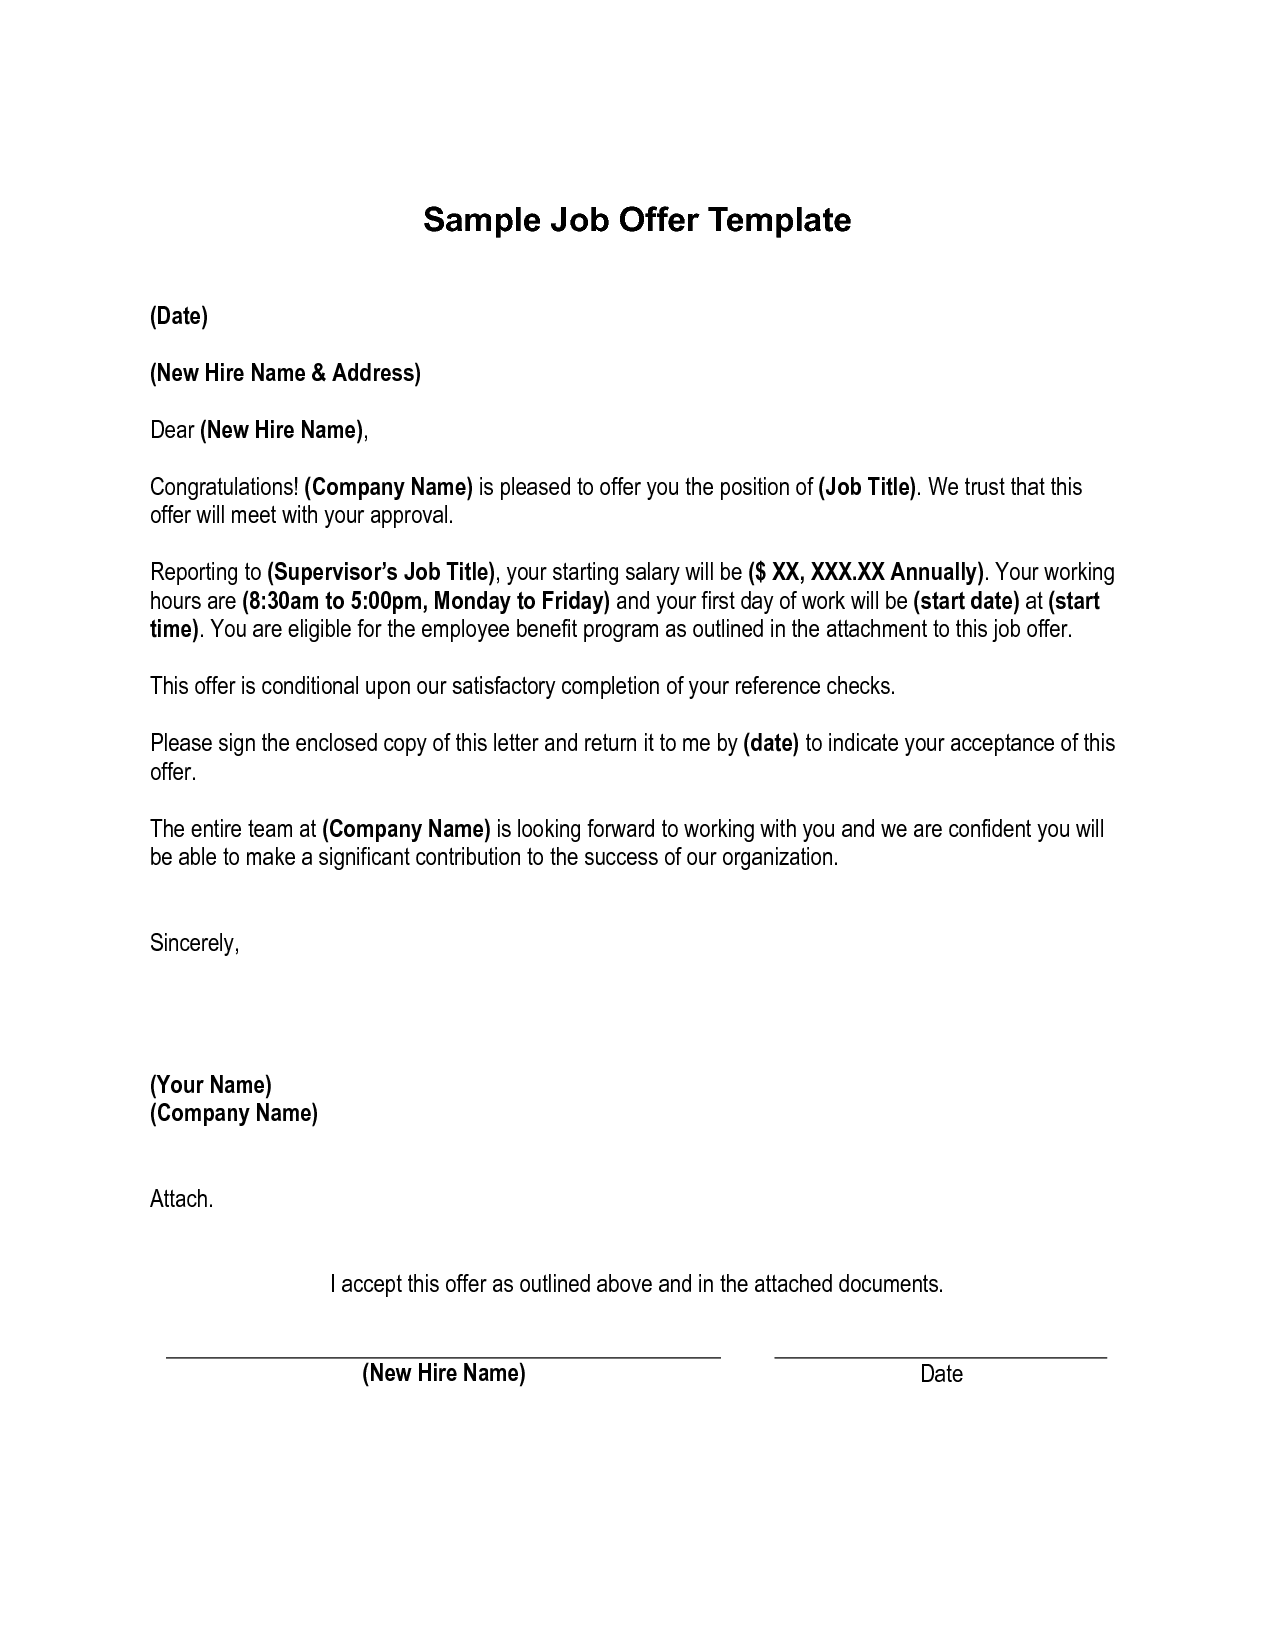 job-offer-letter-from-employer-to-employee-planner-template-free